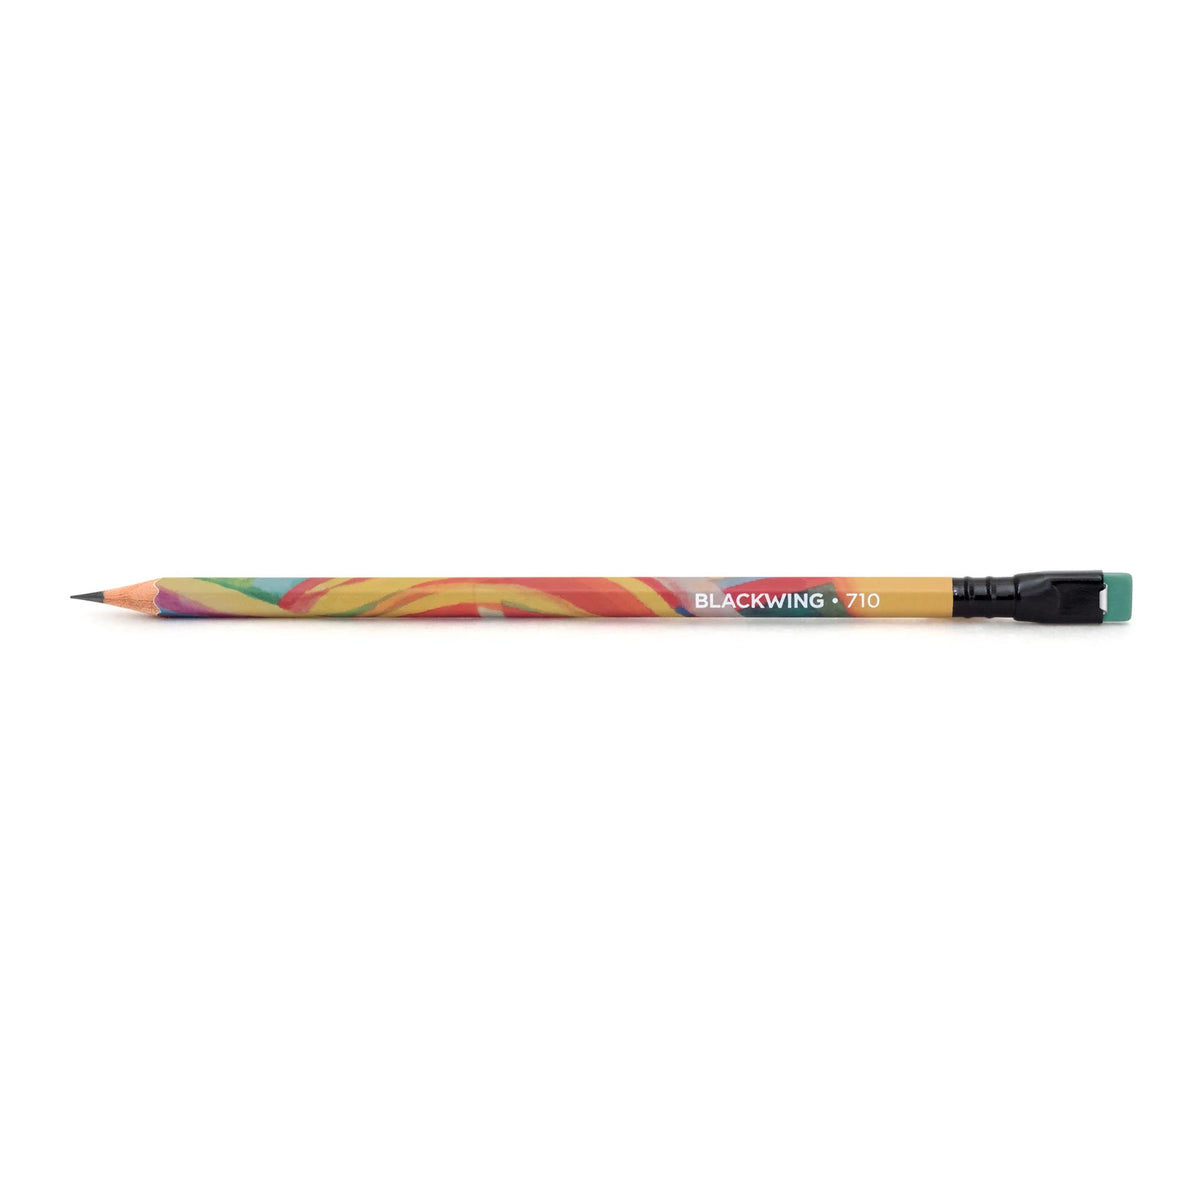 Blackwing Volume #710 - The Jerry Garcia Pencil